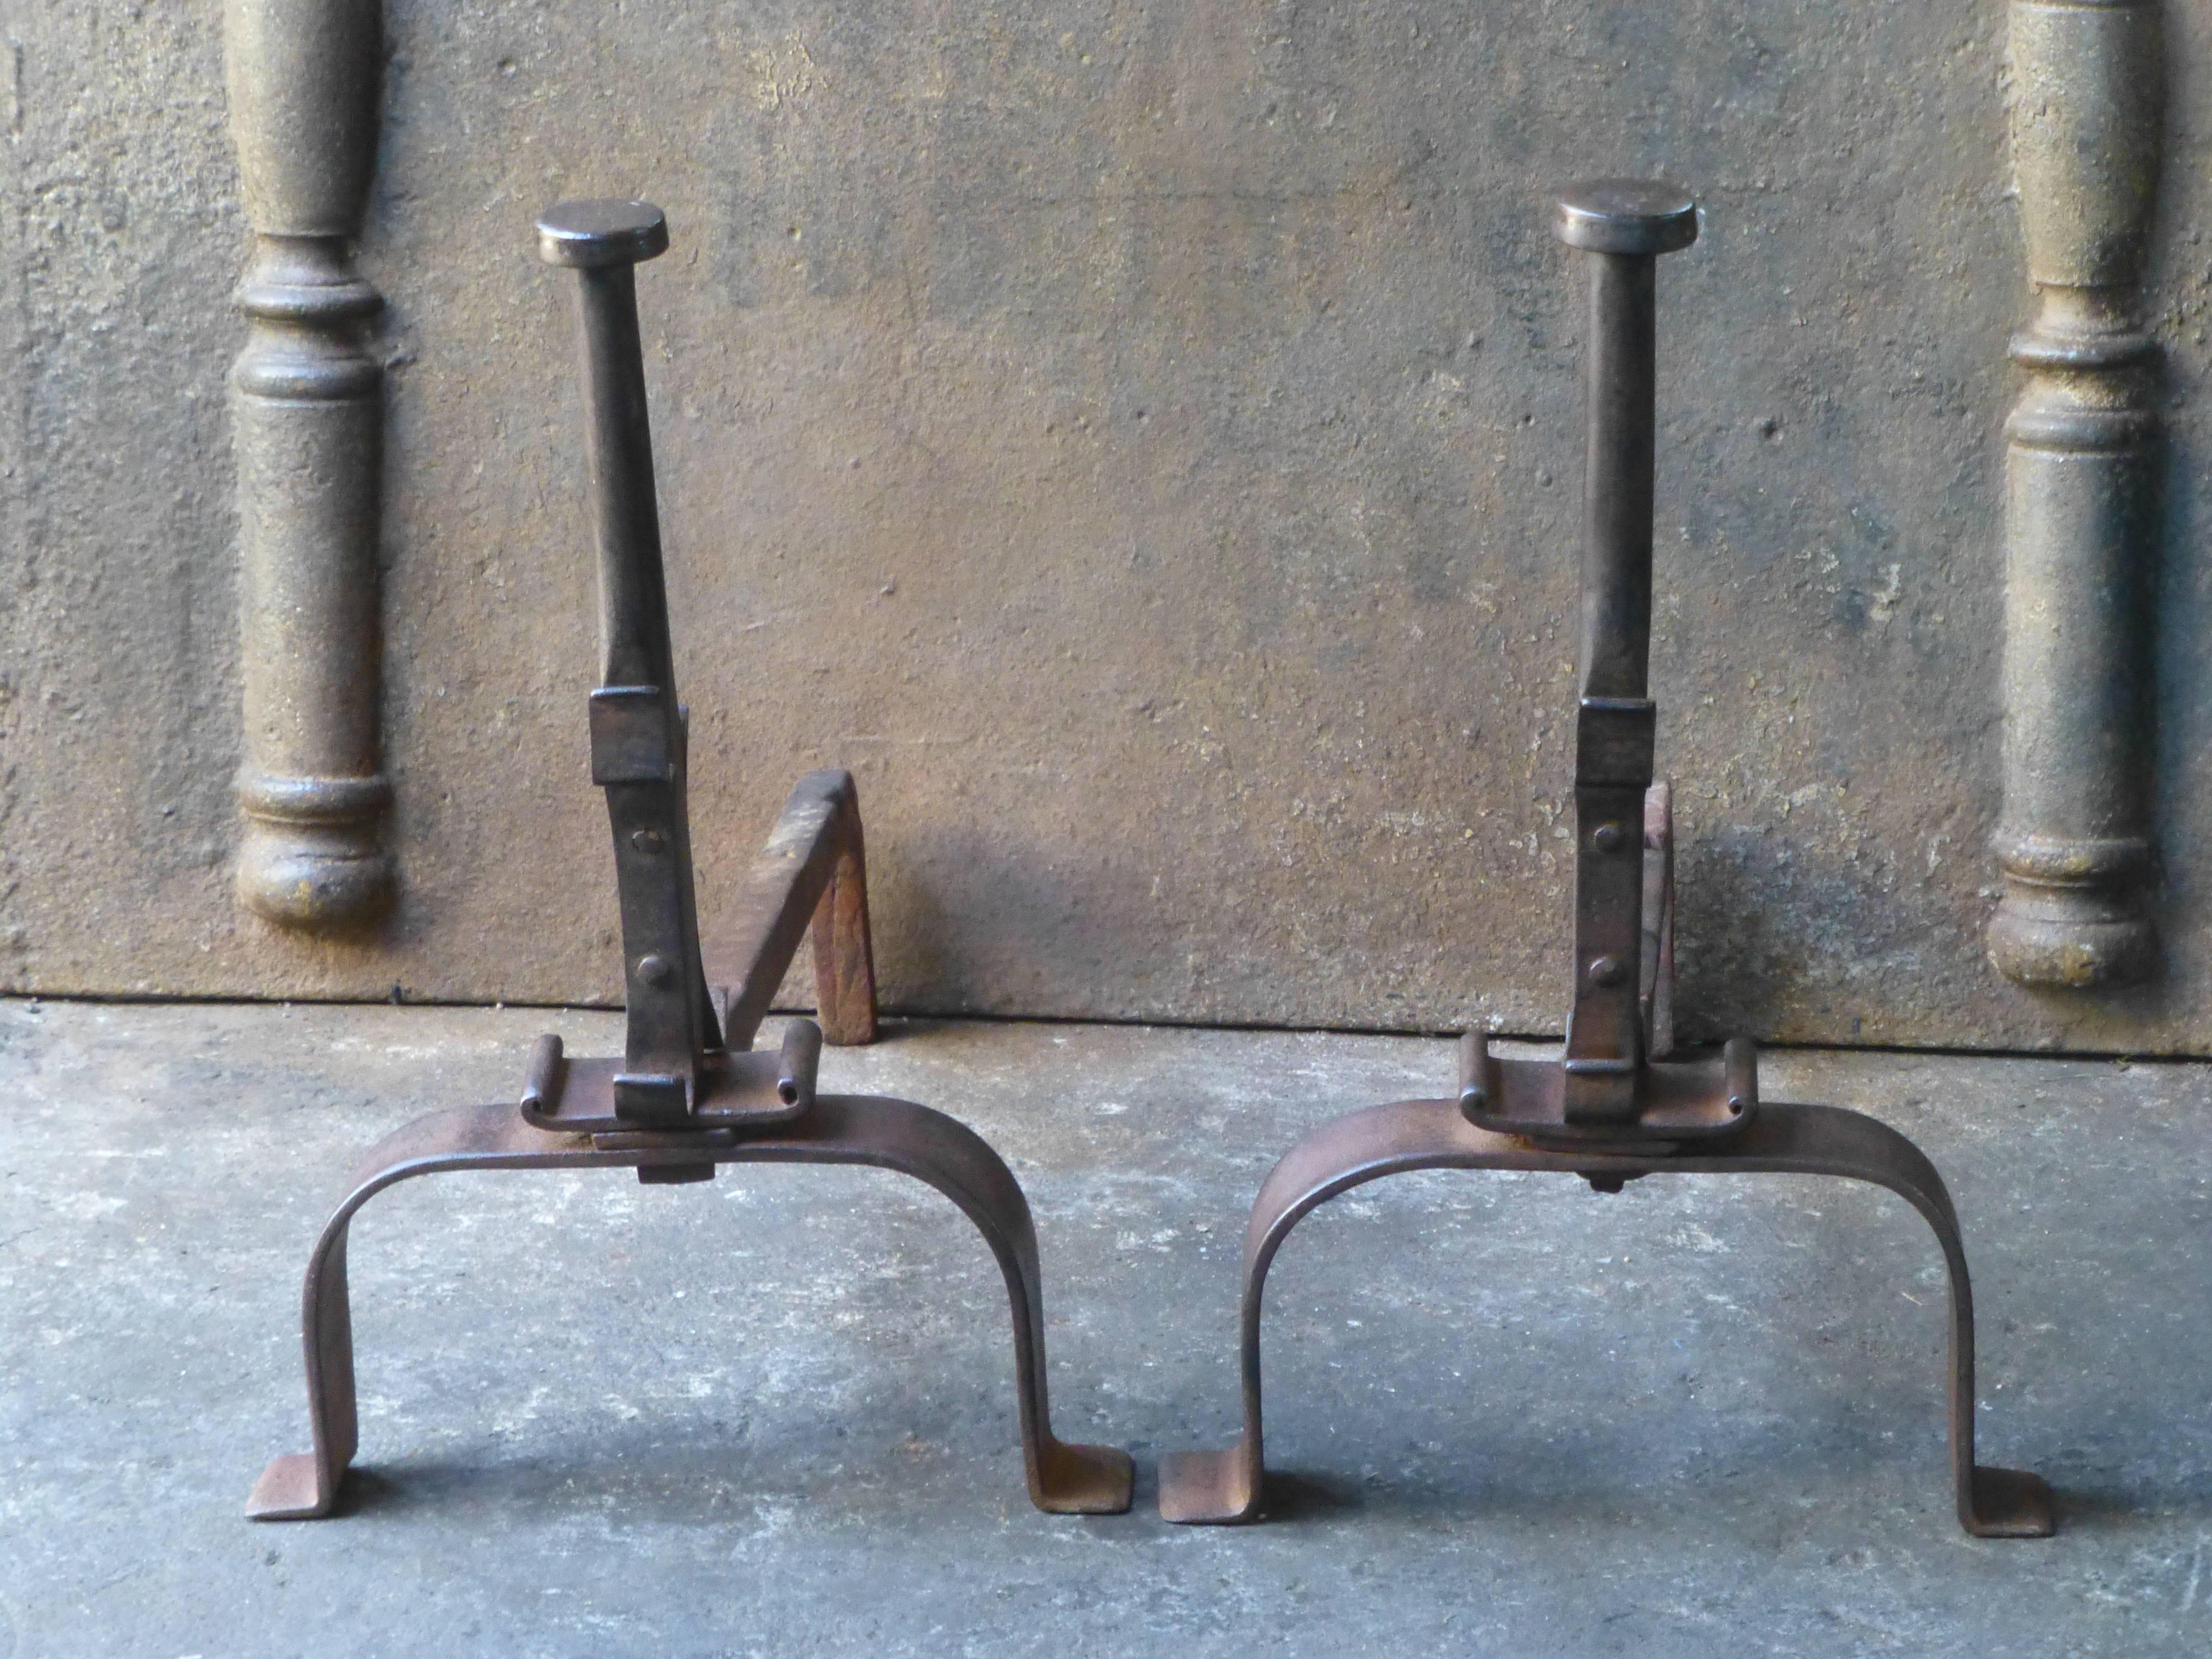 19th century French Napoleon III period andirons or fire dogs made of wrought iron. The andirons have spit hooks. The condition is good.